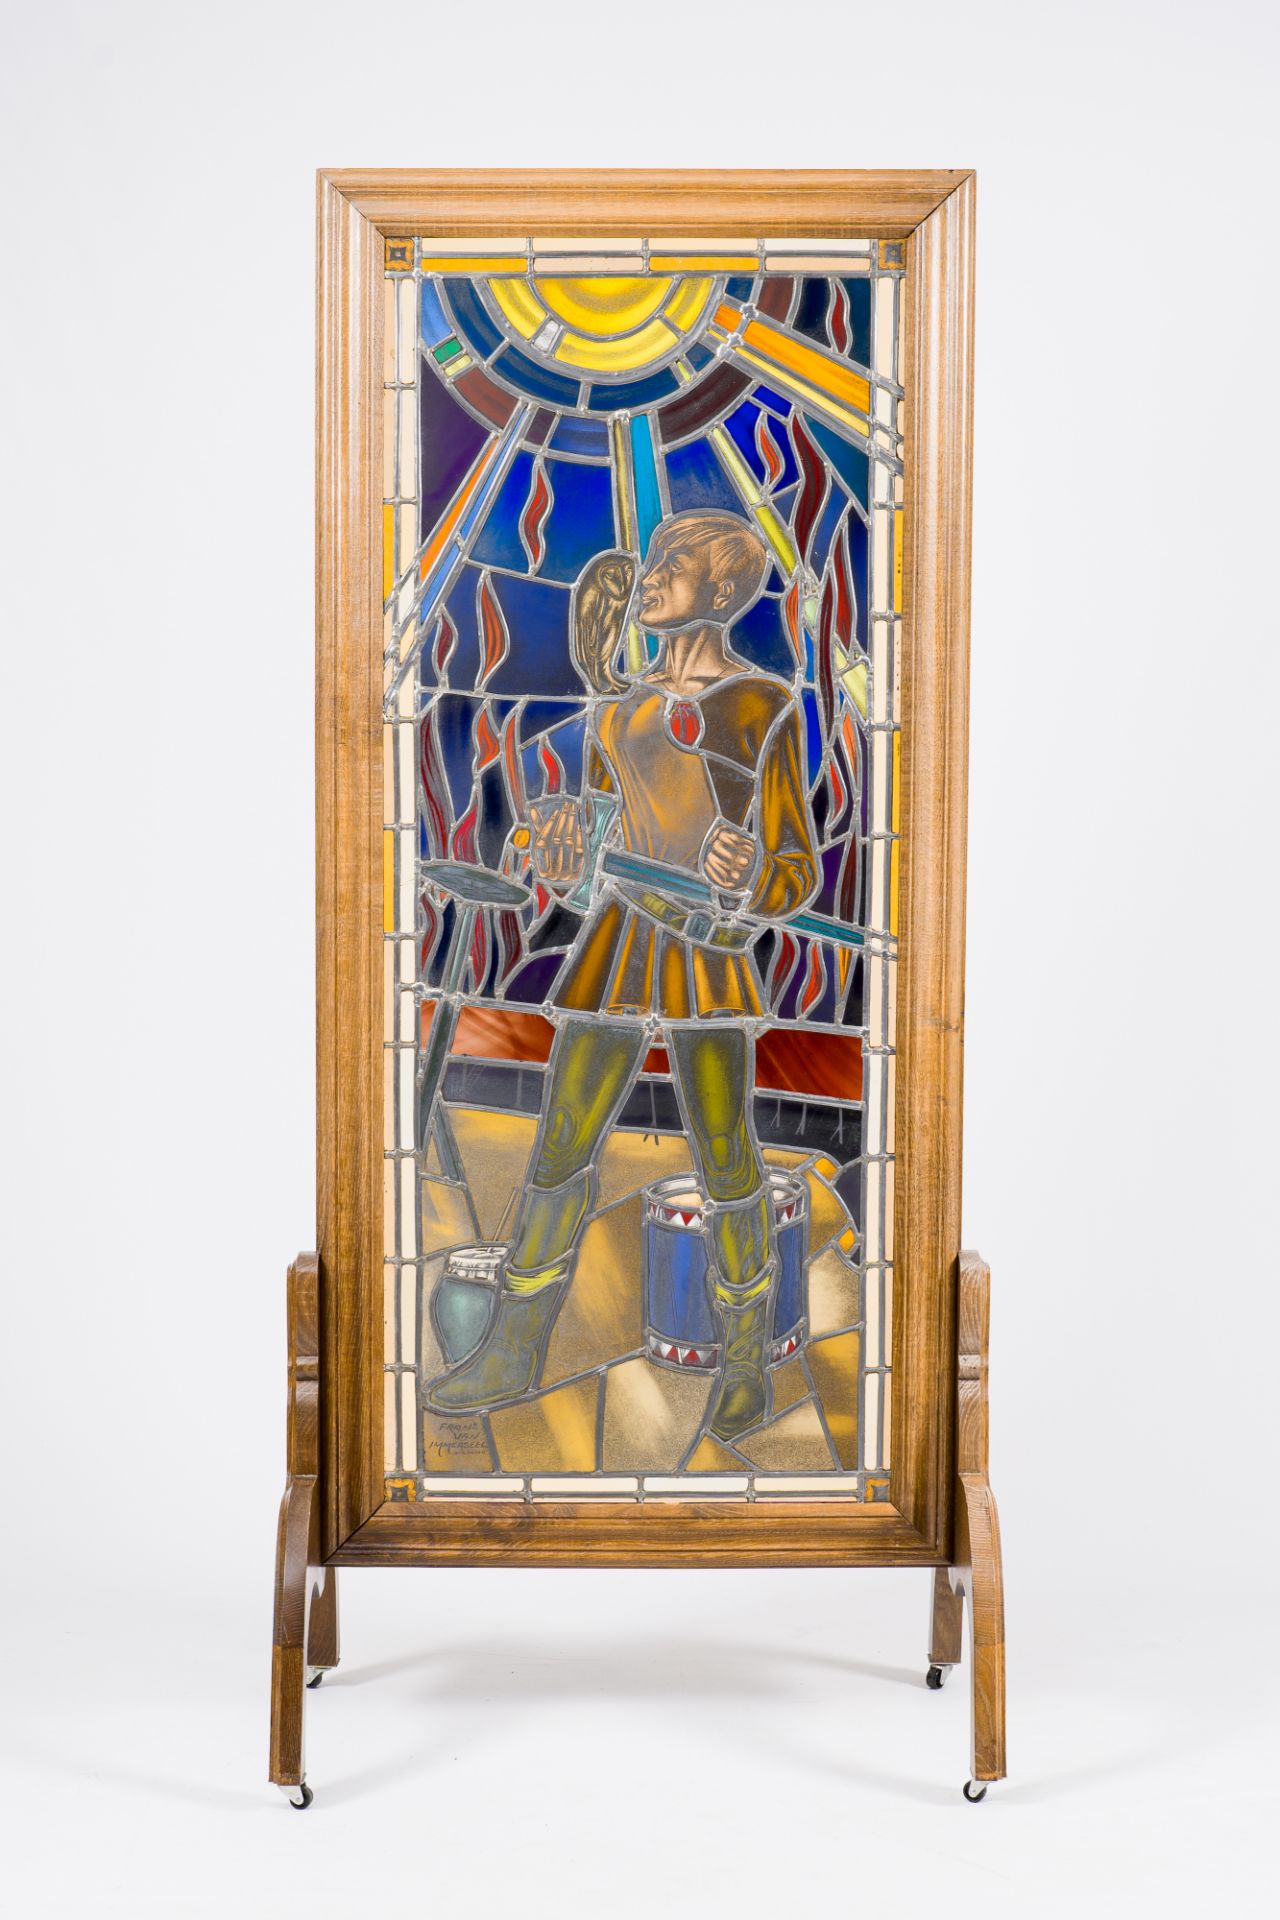 Frans Van Immerseel (1909-1978): A painted and stained glass 'Till Eulenspiegel' window in a wood fr - Image 2 of 8